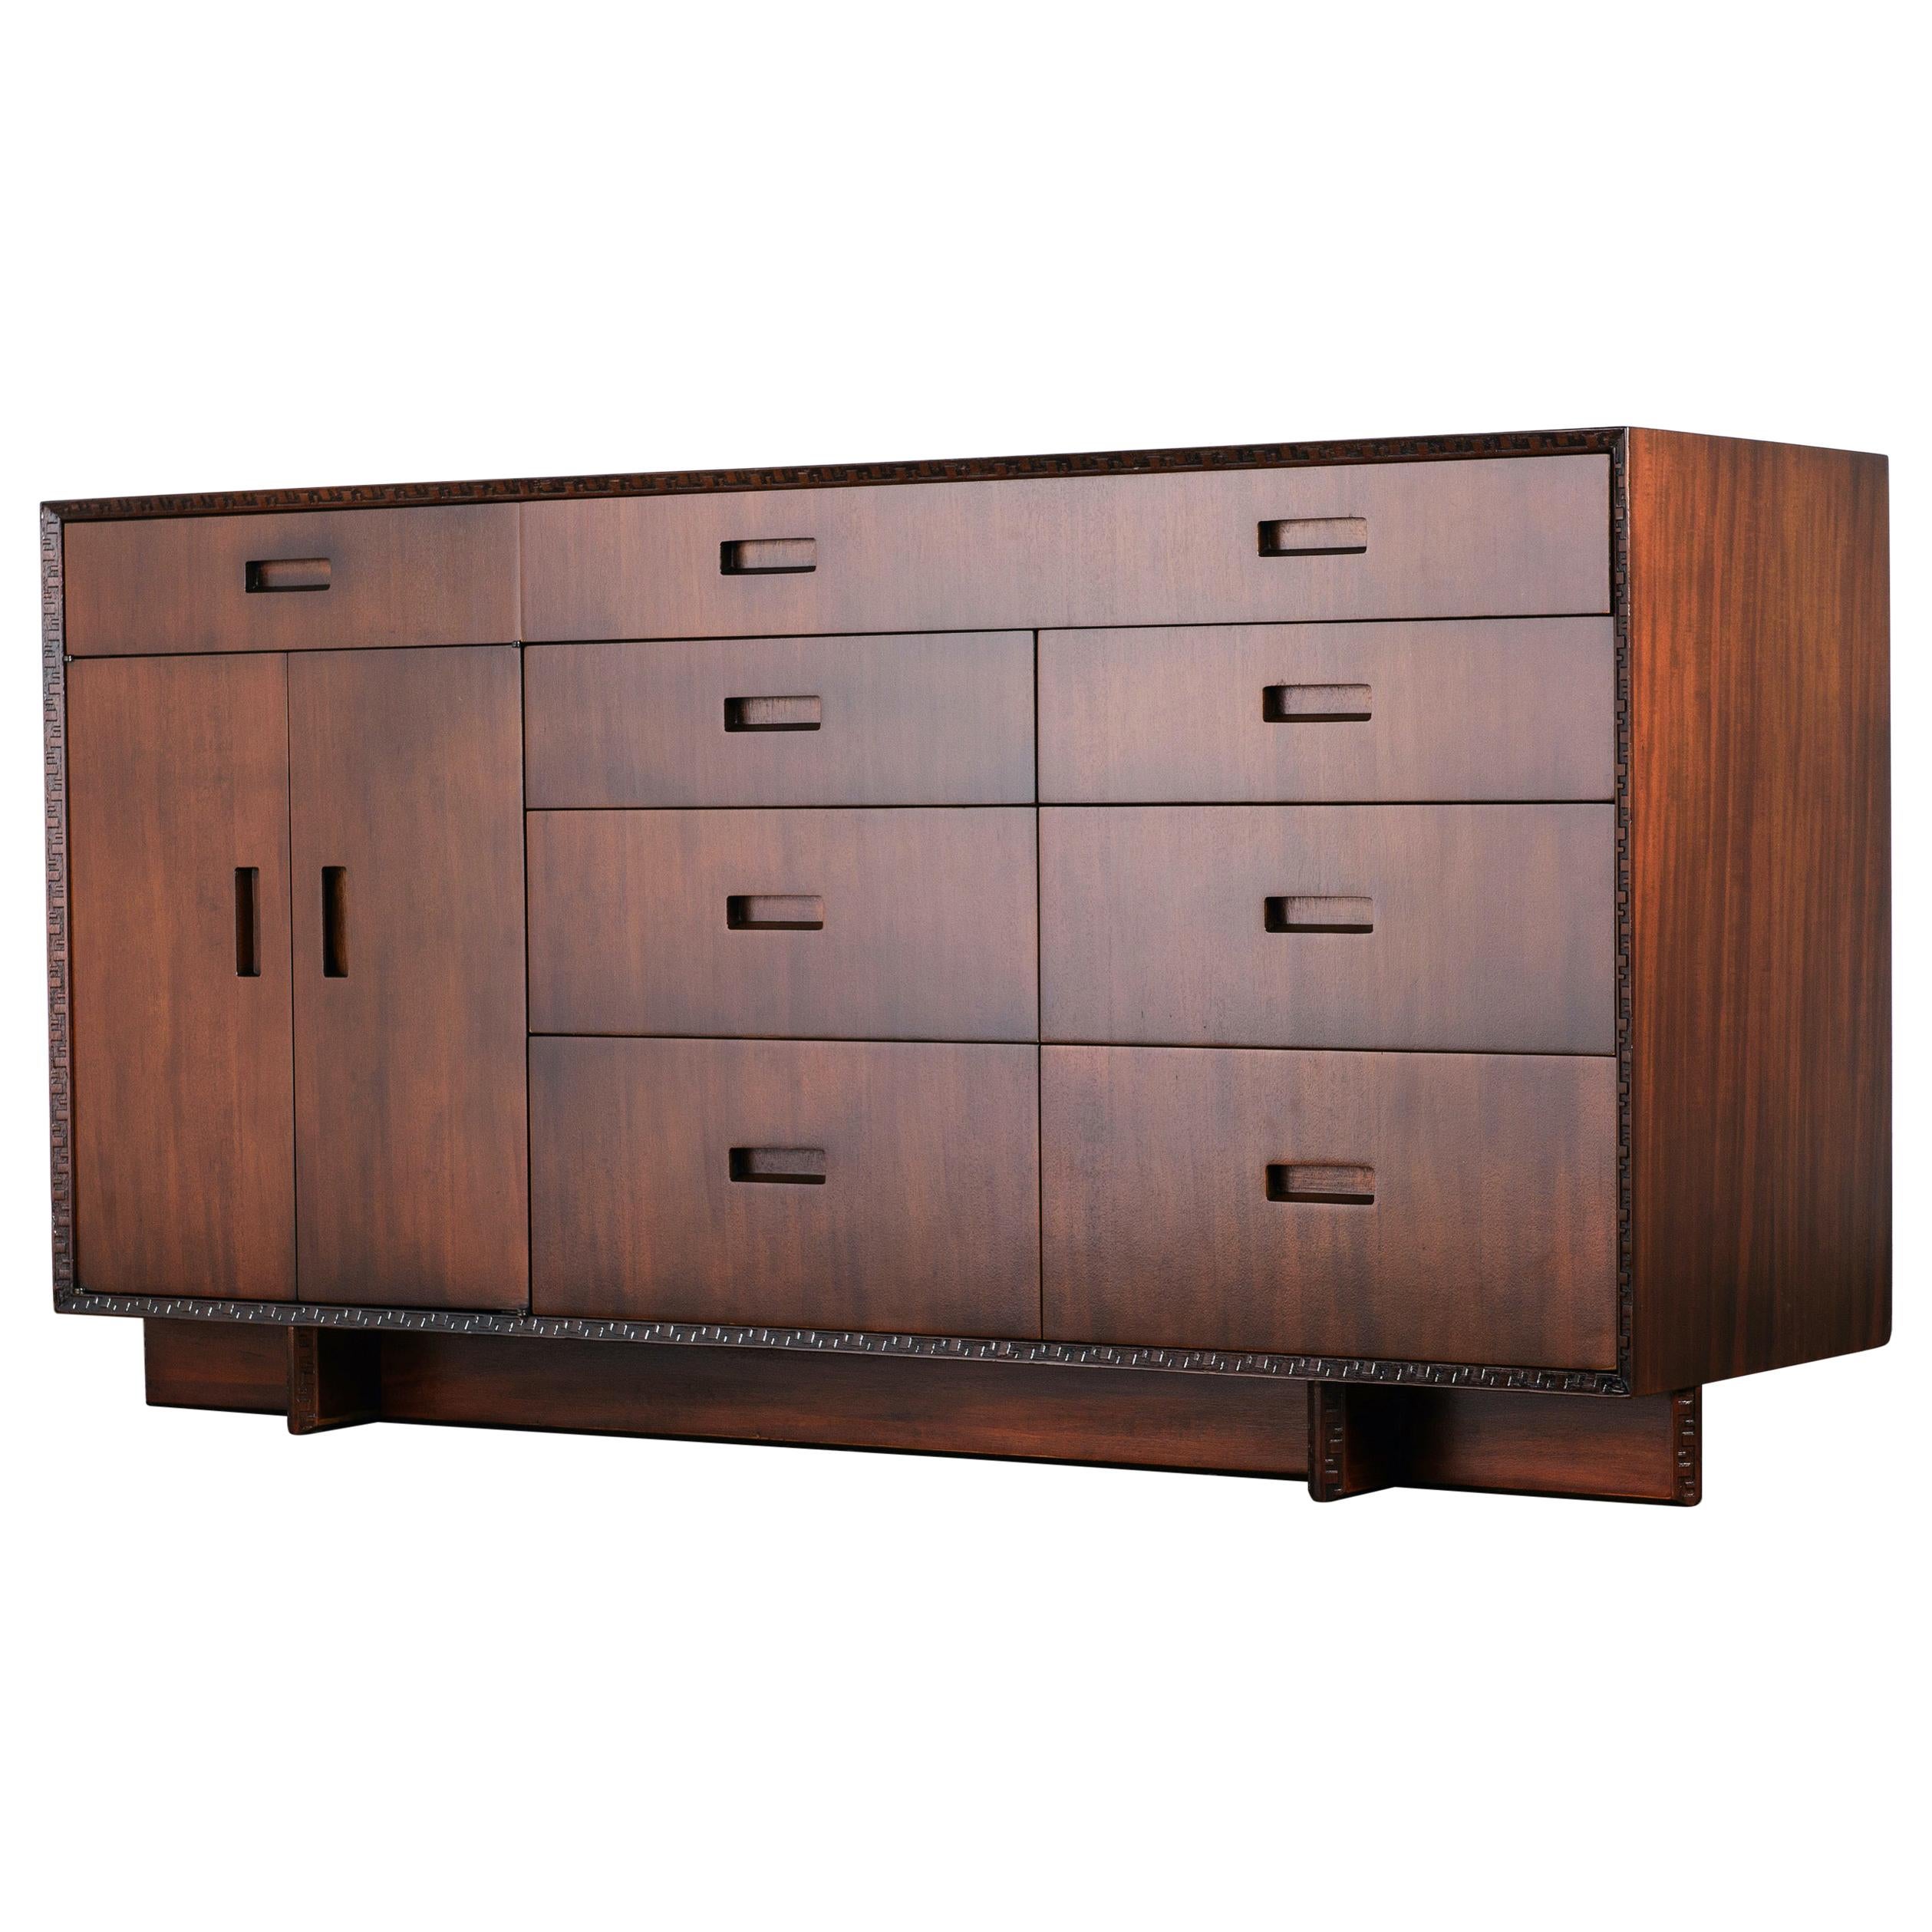 'Taliesin' Collection Mahogany Sideboard by Frank Lloyd Wright, 1955, Signed